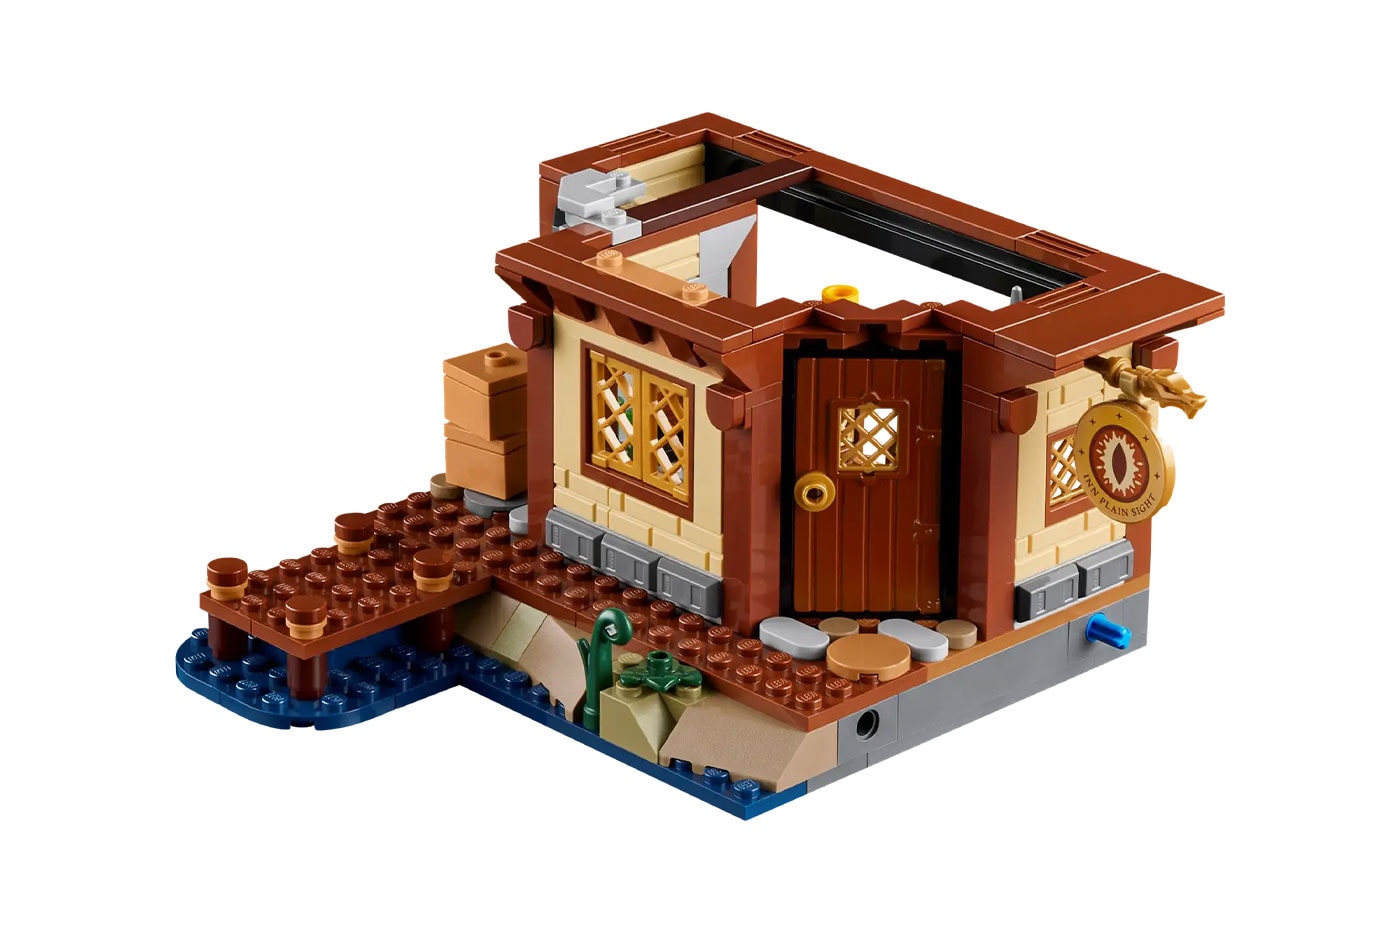 LEGO Dungeons & Dragons Red Dragon Tale Set Release Info